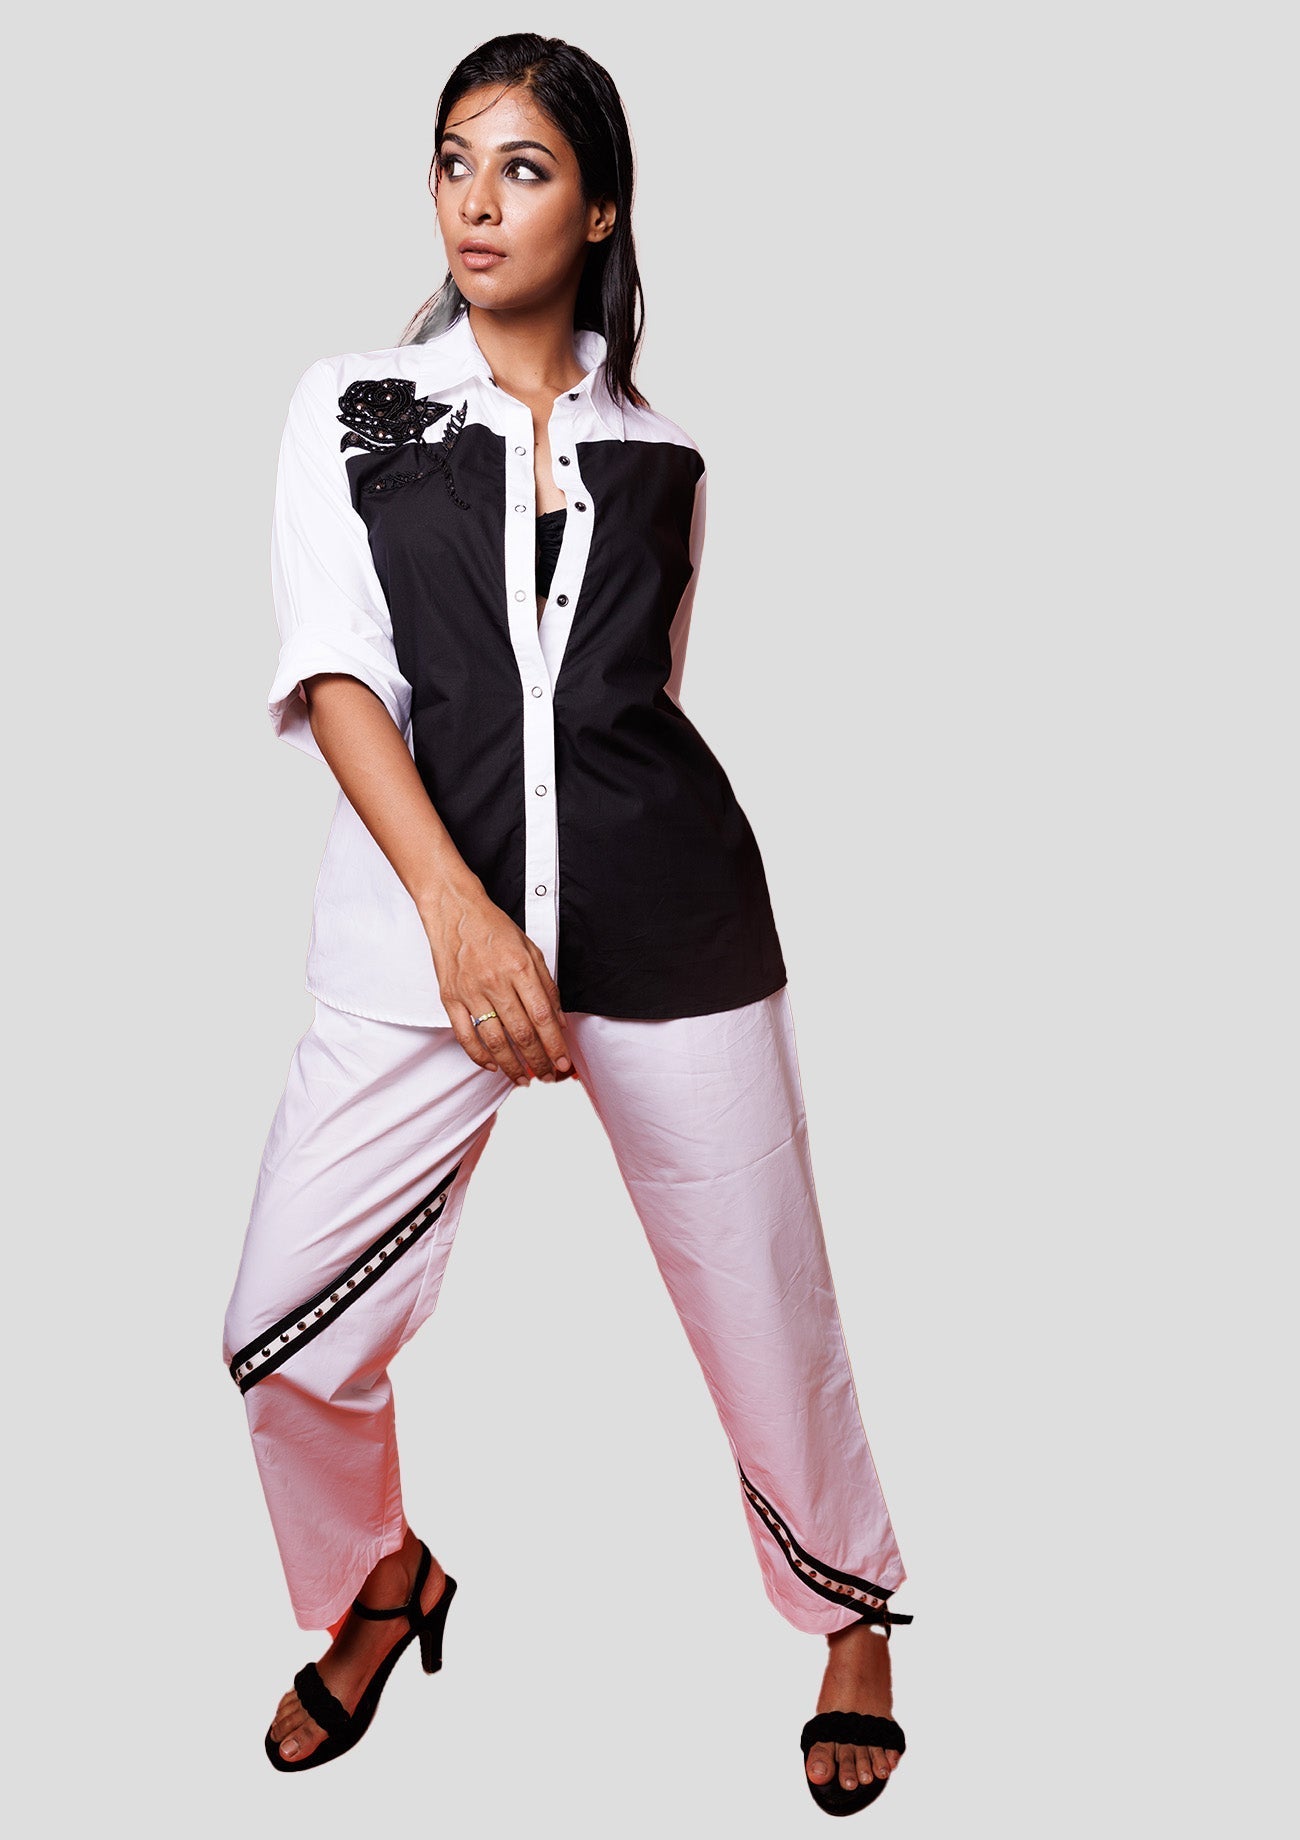 Black & White Cotton Shirt With Cutwork Rose Embroidery, With White Straightcotton Pants With Embellished Tape